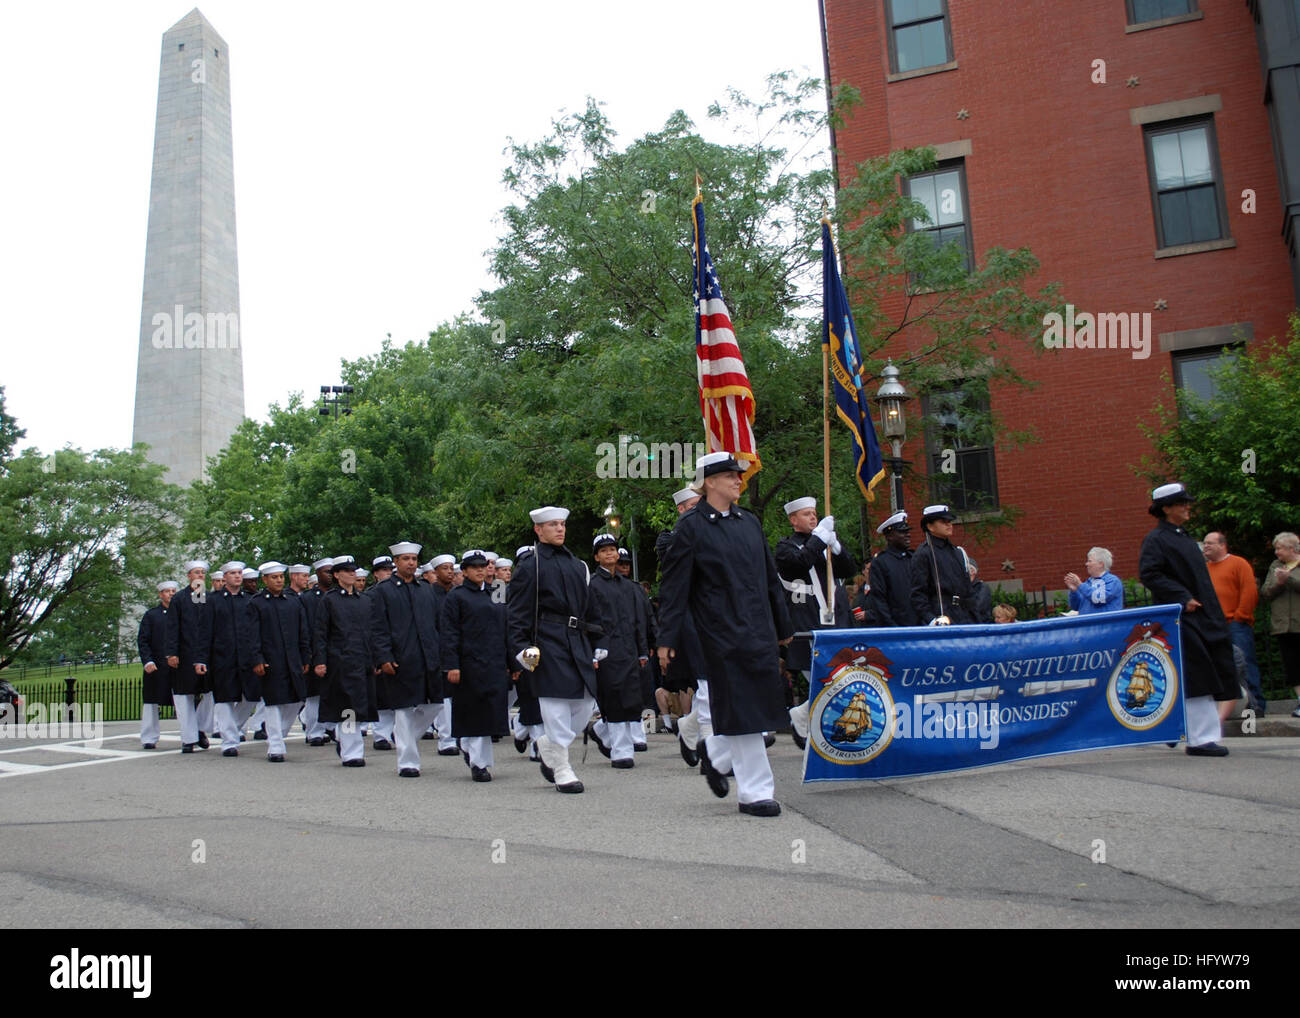 110612-N-JO624-146 CHARLESTOWN, Mass. (June 12, 2011) Sailors assigned to USS Constitution march past Bunker Hill Monument during the 2011 Bunker Hill Day parade. The parade honors the 236th anniversary of the Battle of Bunker Hill, June 17, 1775, which was one of the first major engagements of the Revolutionary War. (U.S. Navy photo by Mass Communication Specialist 1st Class Frank E. Neely/Released) US Navy 110612-N-JO624-146 Sailors march past Bunker Hill Monument during the 2011 Bunker Hill Day parade Stock Photo